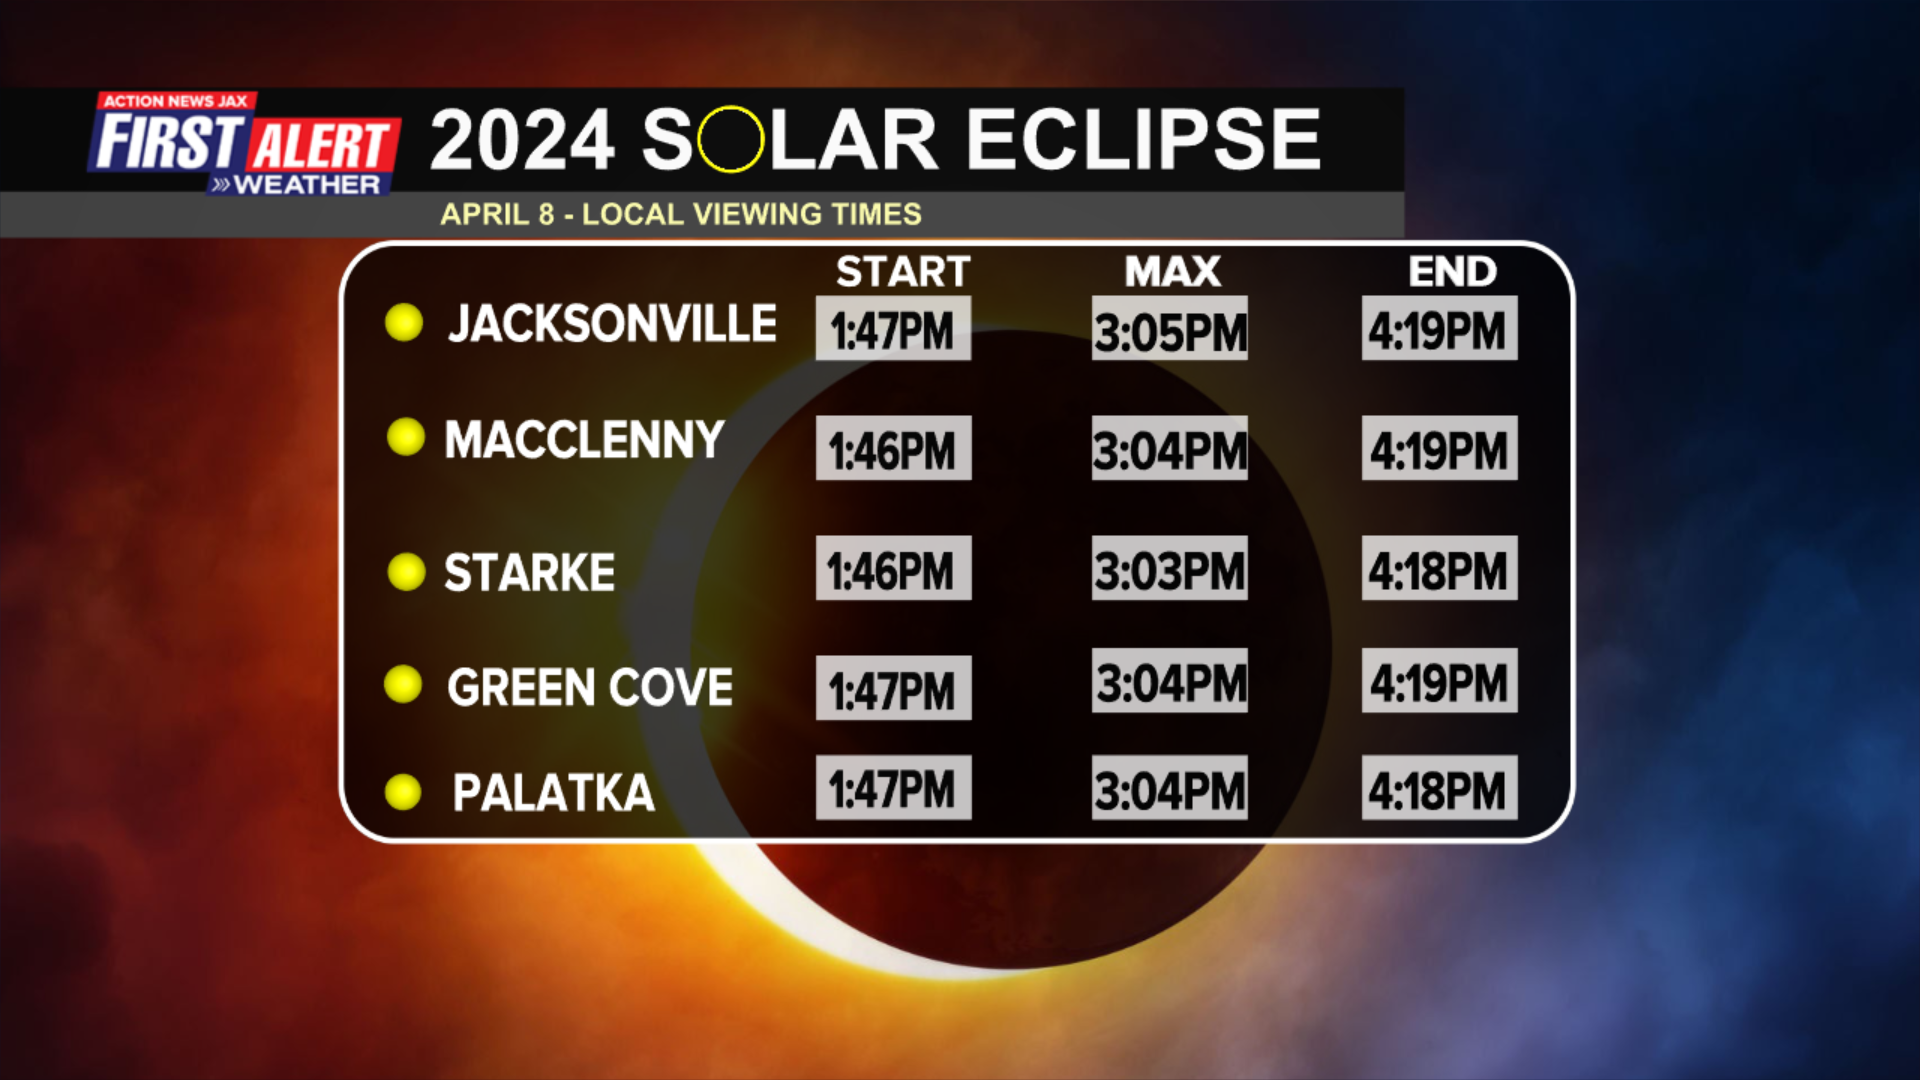 2024 Solar Eclipse Local Viewing Times - Jacksonville